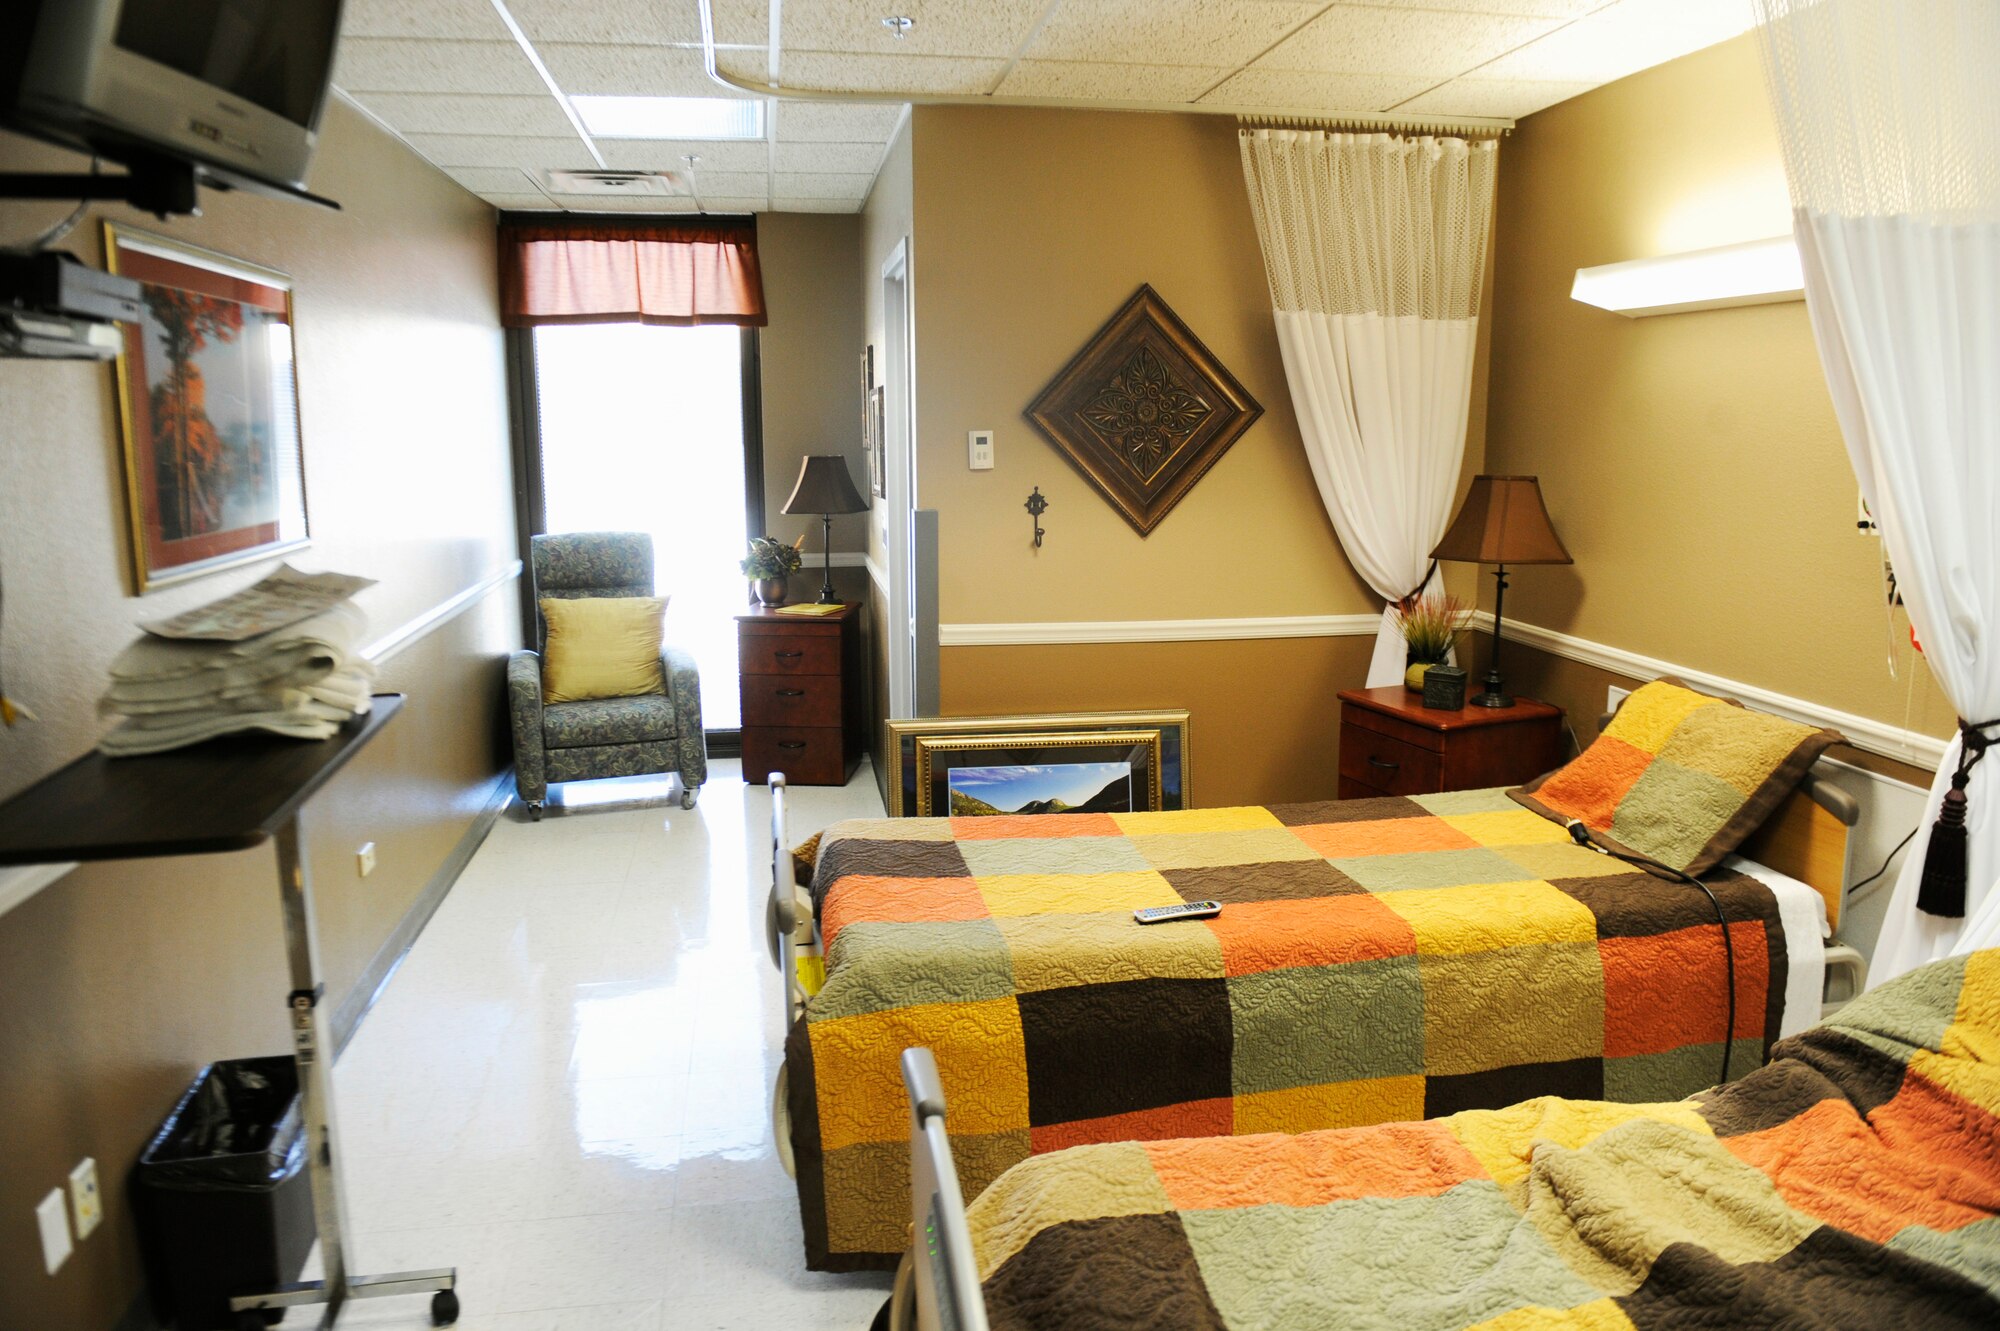 A patient's room at the 375th Aeromedical Staging Flight is shown here, is decorated to offer a relaxing, home-like atmosphere Dec. 13, 2010, at Scott Air Force Base, Ill. This room is sponsored and designed by the Officer's Spouses Club and is one of 17 patient rooms and nine common areas sponsored by various agencies around the base. (U.S. Air Force photo/ Staff Sgt. Ryan Crane)
